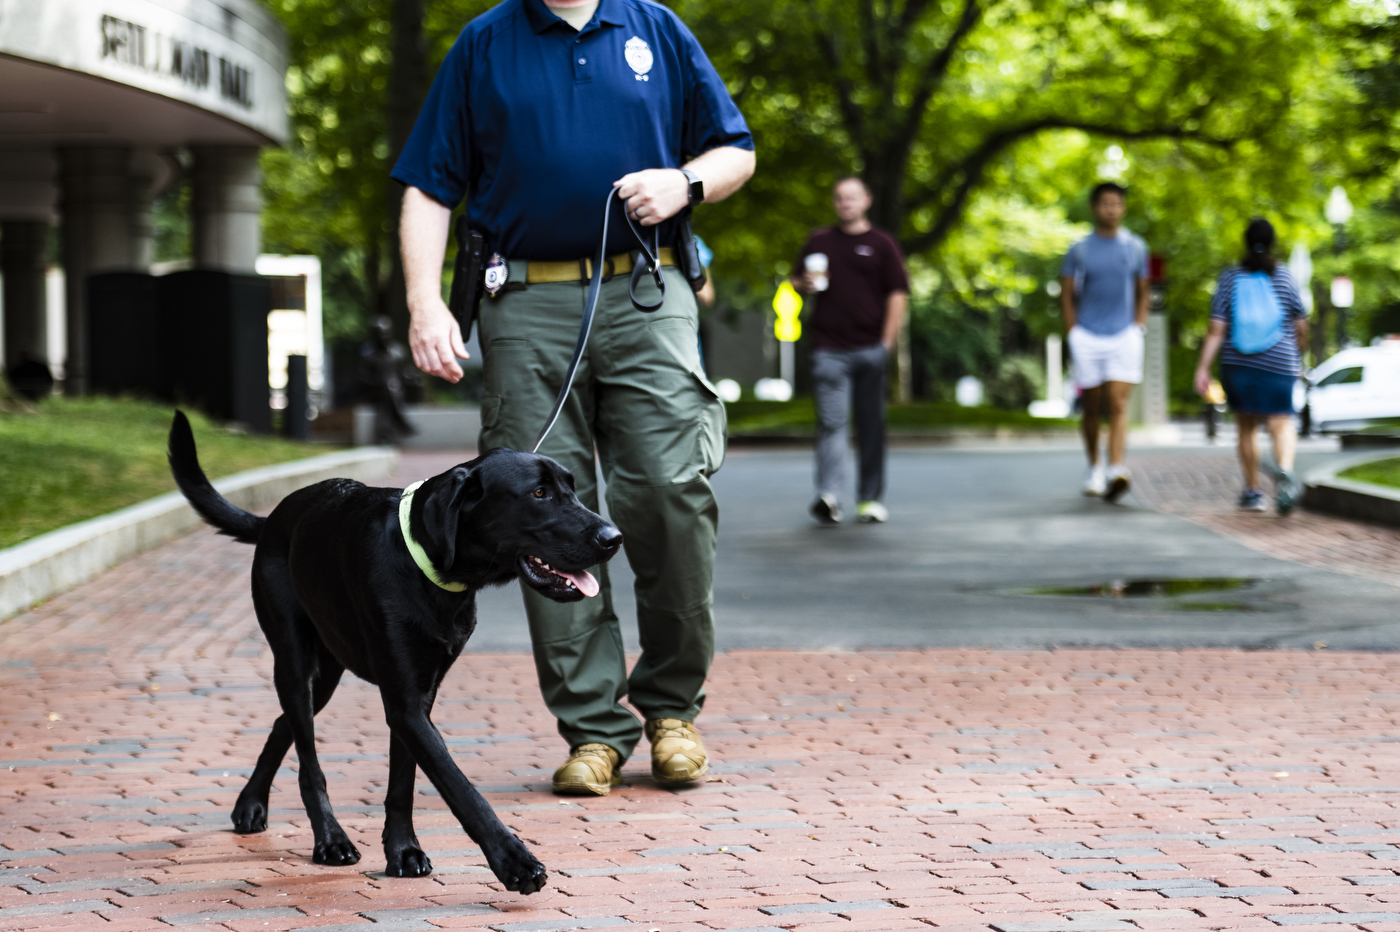 Sarge, a 1-year old black lab and the newest member of Northeastern's pack, explores the Boston campus with his handler NUPD Officer Sgt. Joe Corbett.